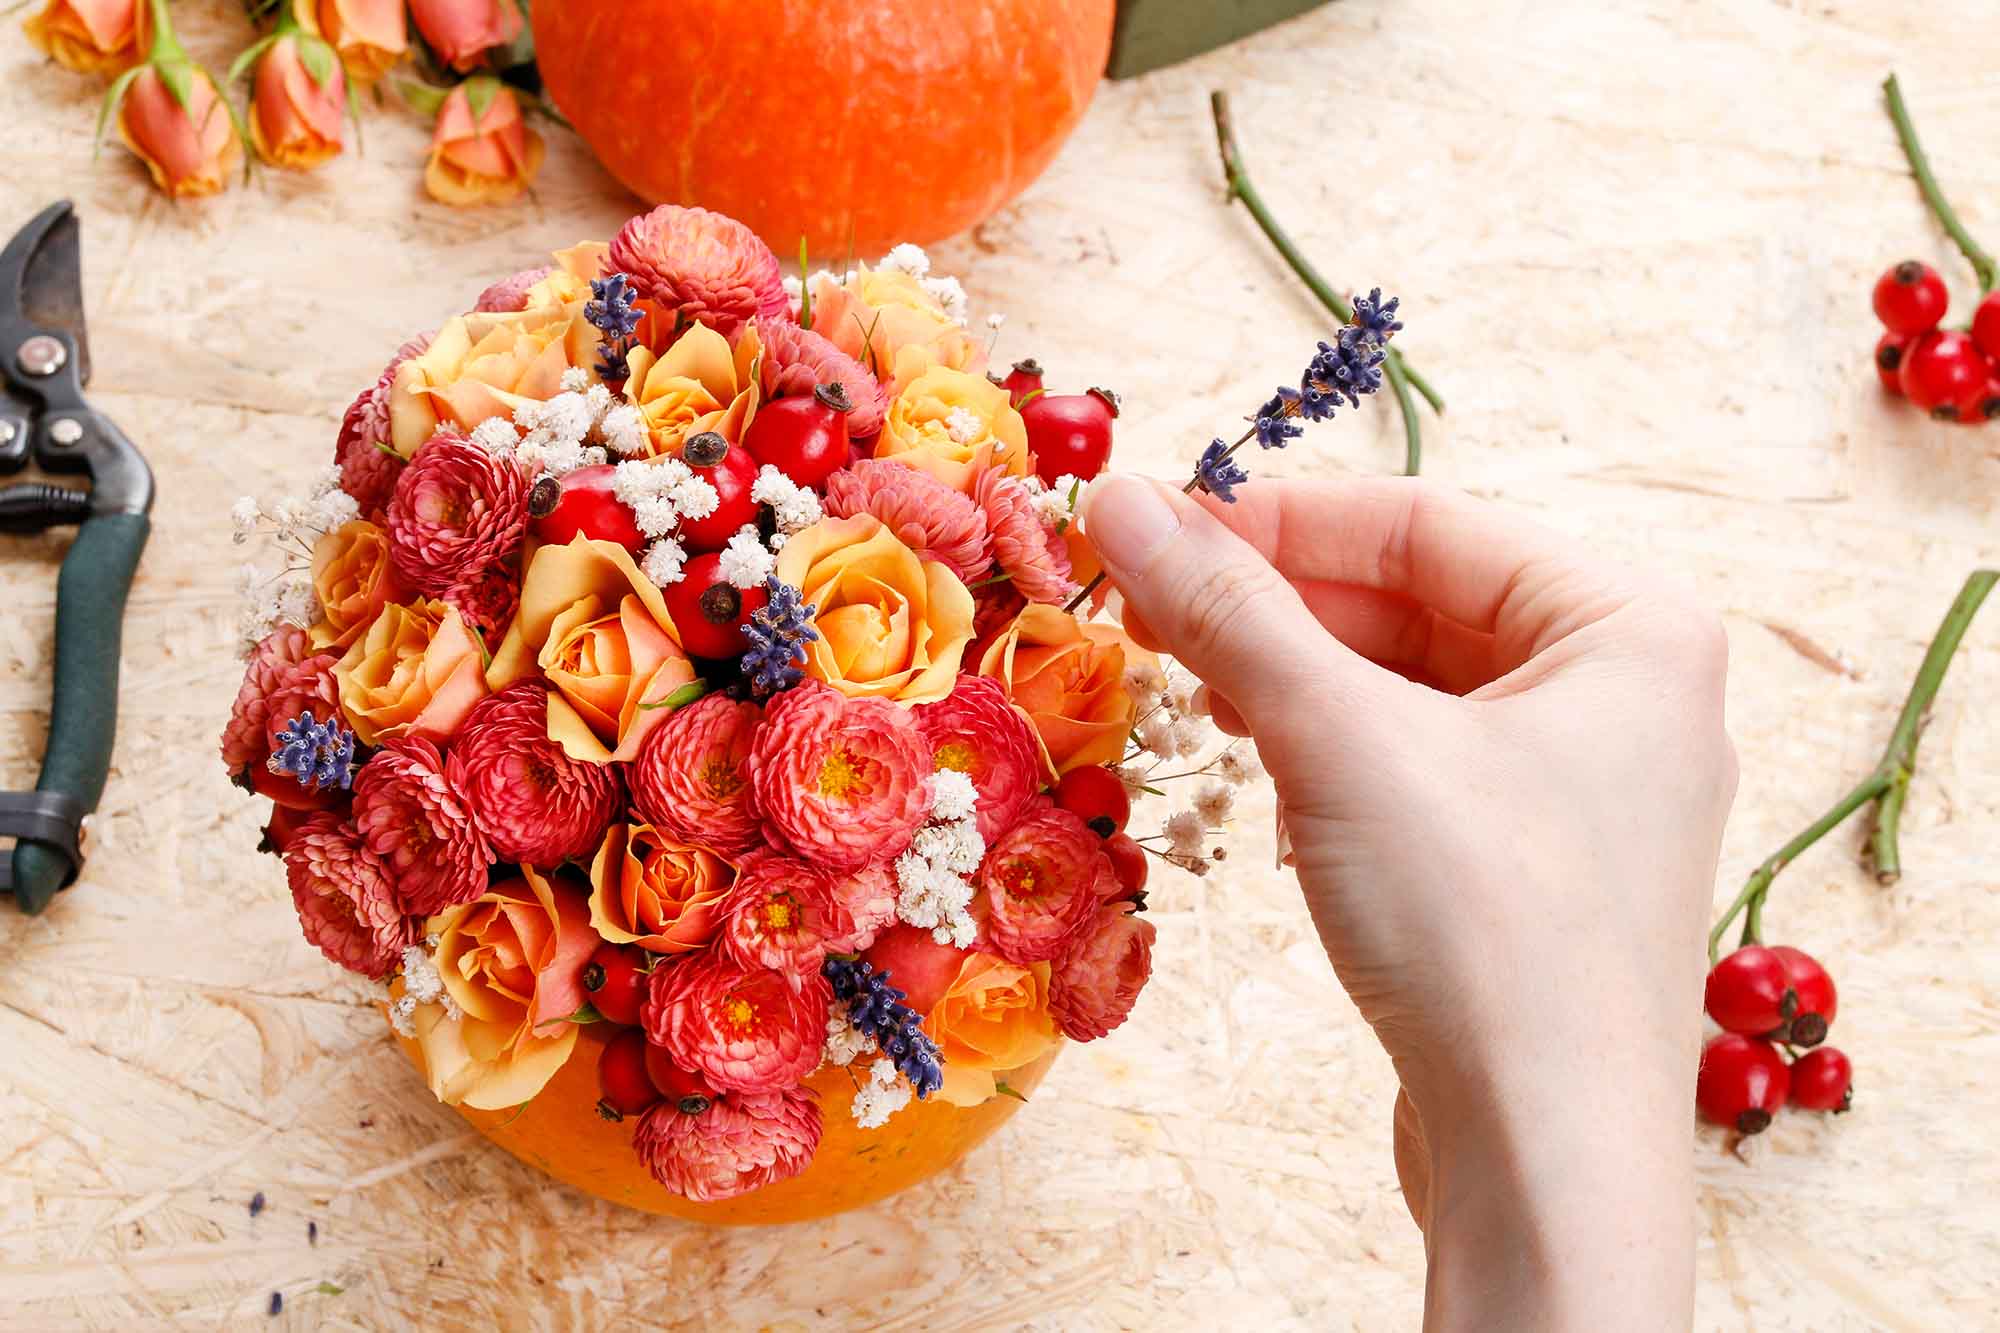 How to make a Thanksgiving centerpiece - step by step: pumpkin, flowers and other objects necessary to make a bouquet in pumpkin